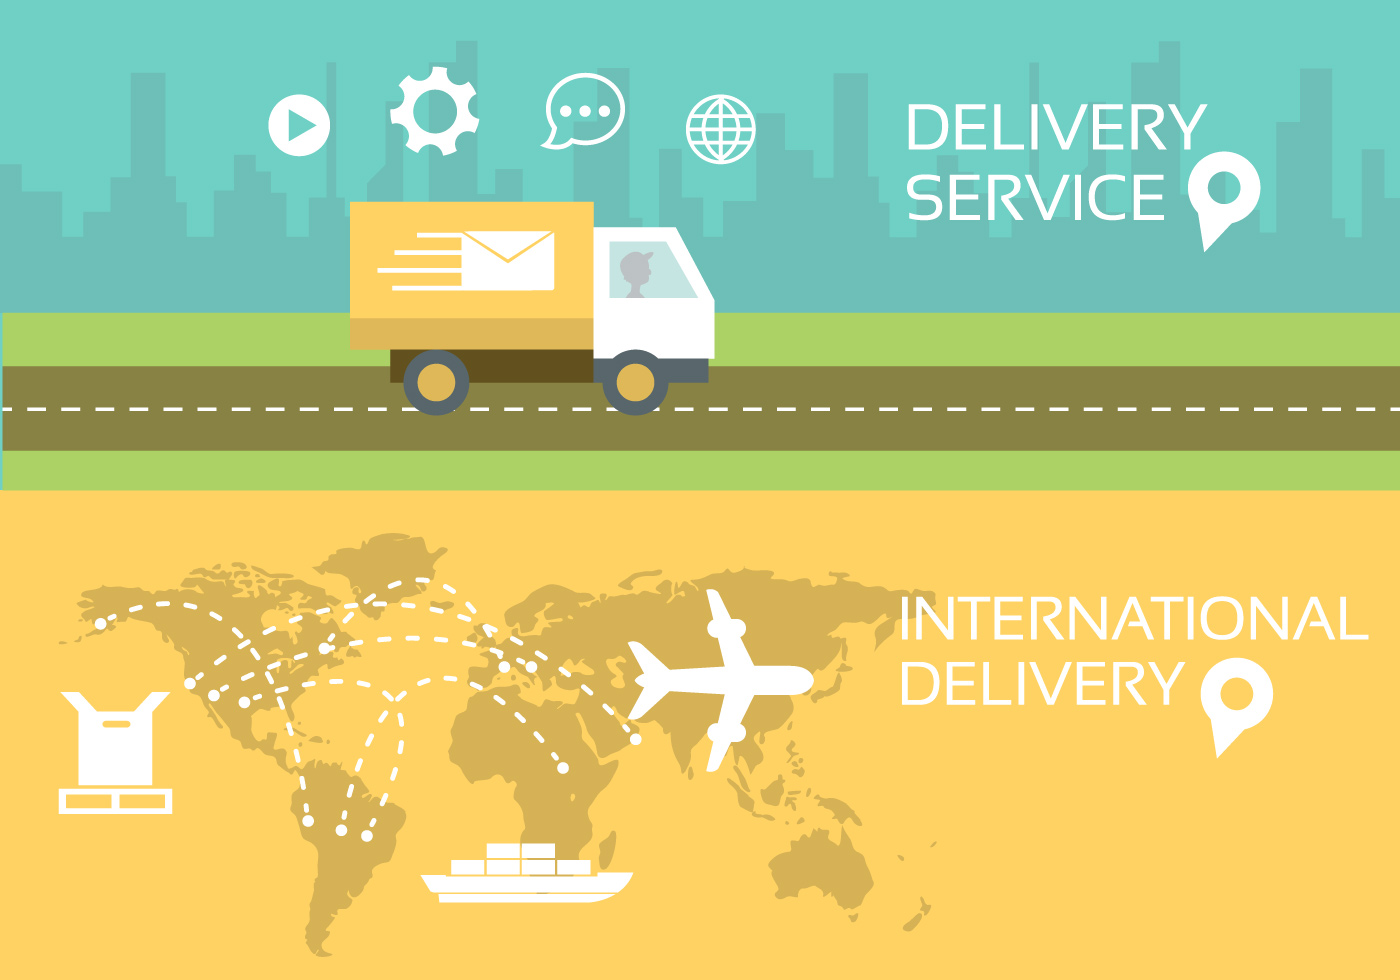 Https post c. International delivery. Postal vector. Worldwide delivery. Visit Card freight delivery.